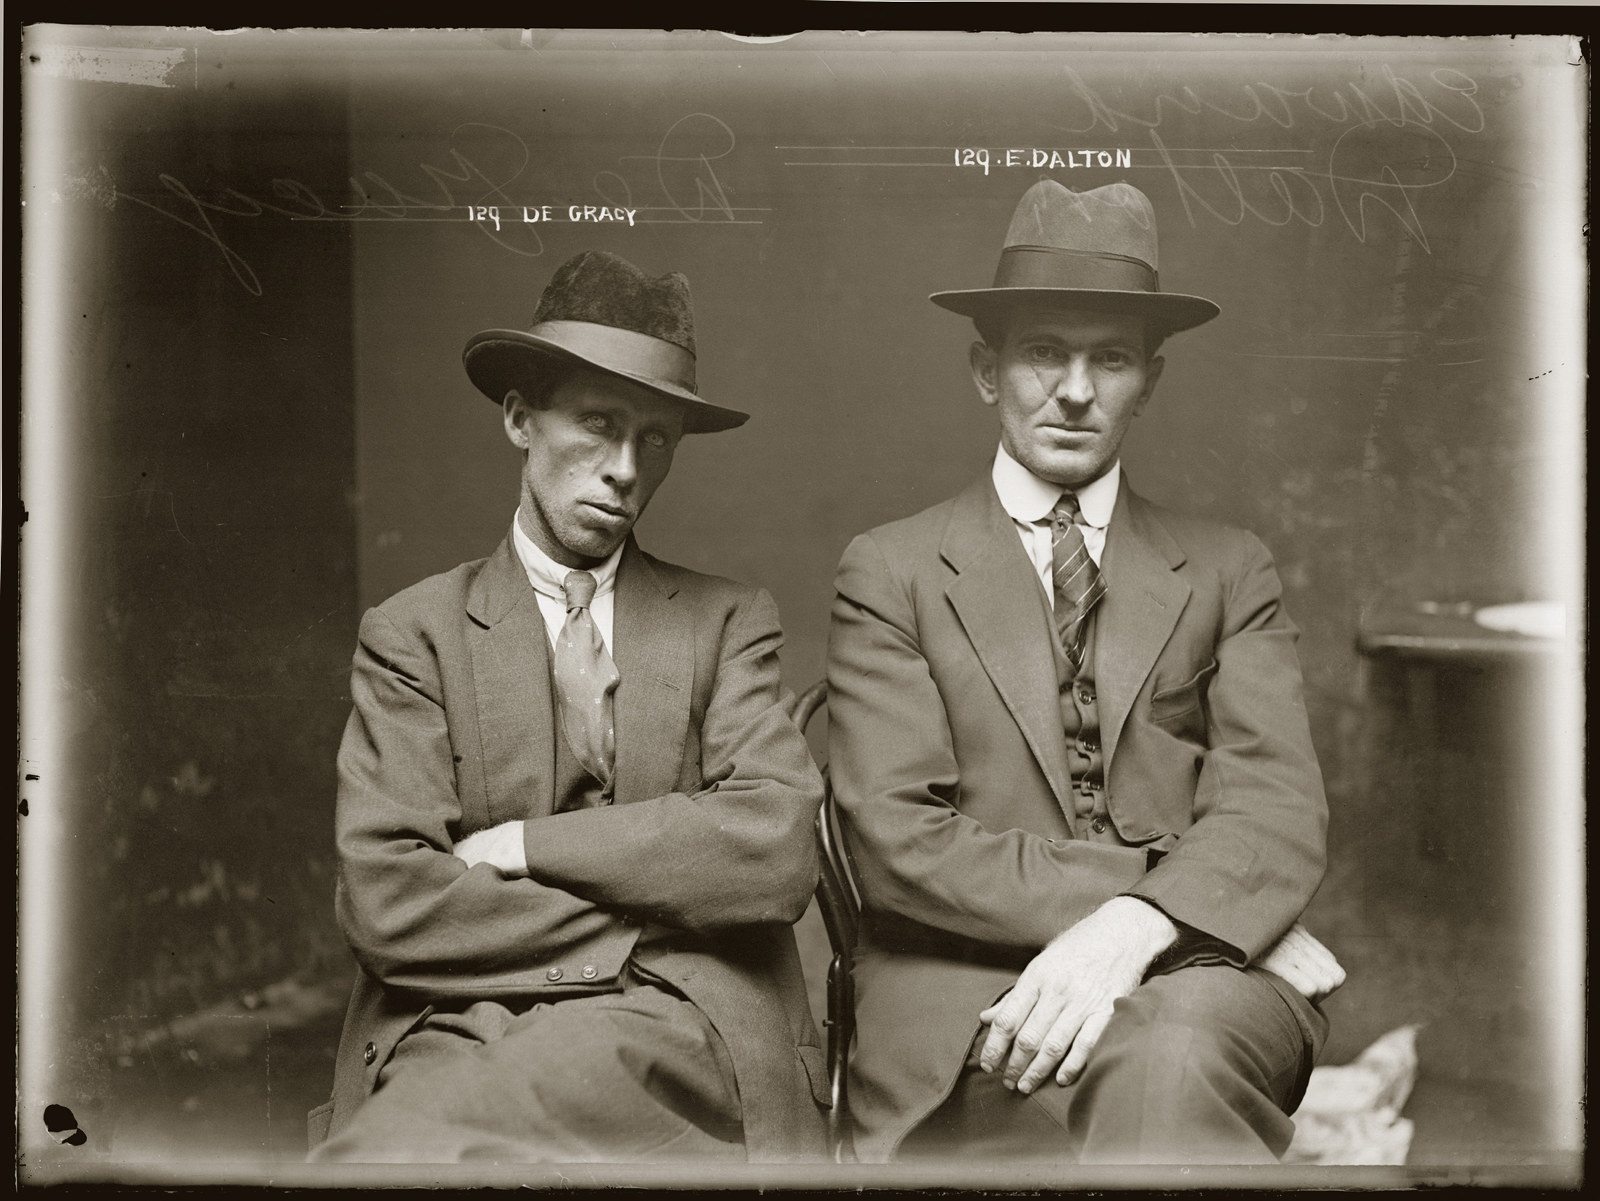 Black and white photograph of twoseated men dressed in hats and suits looking quite defiantly at the camera.